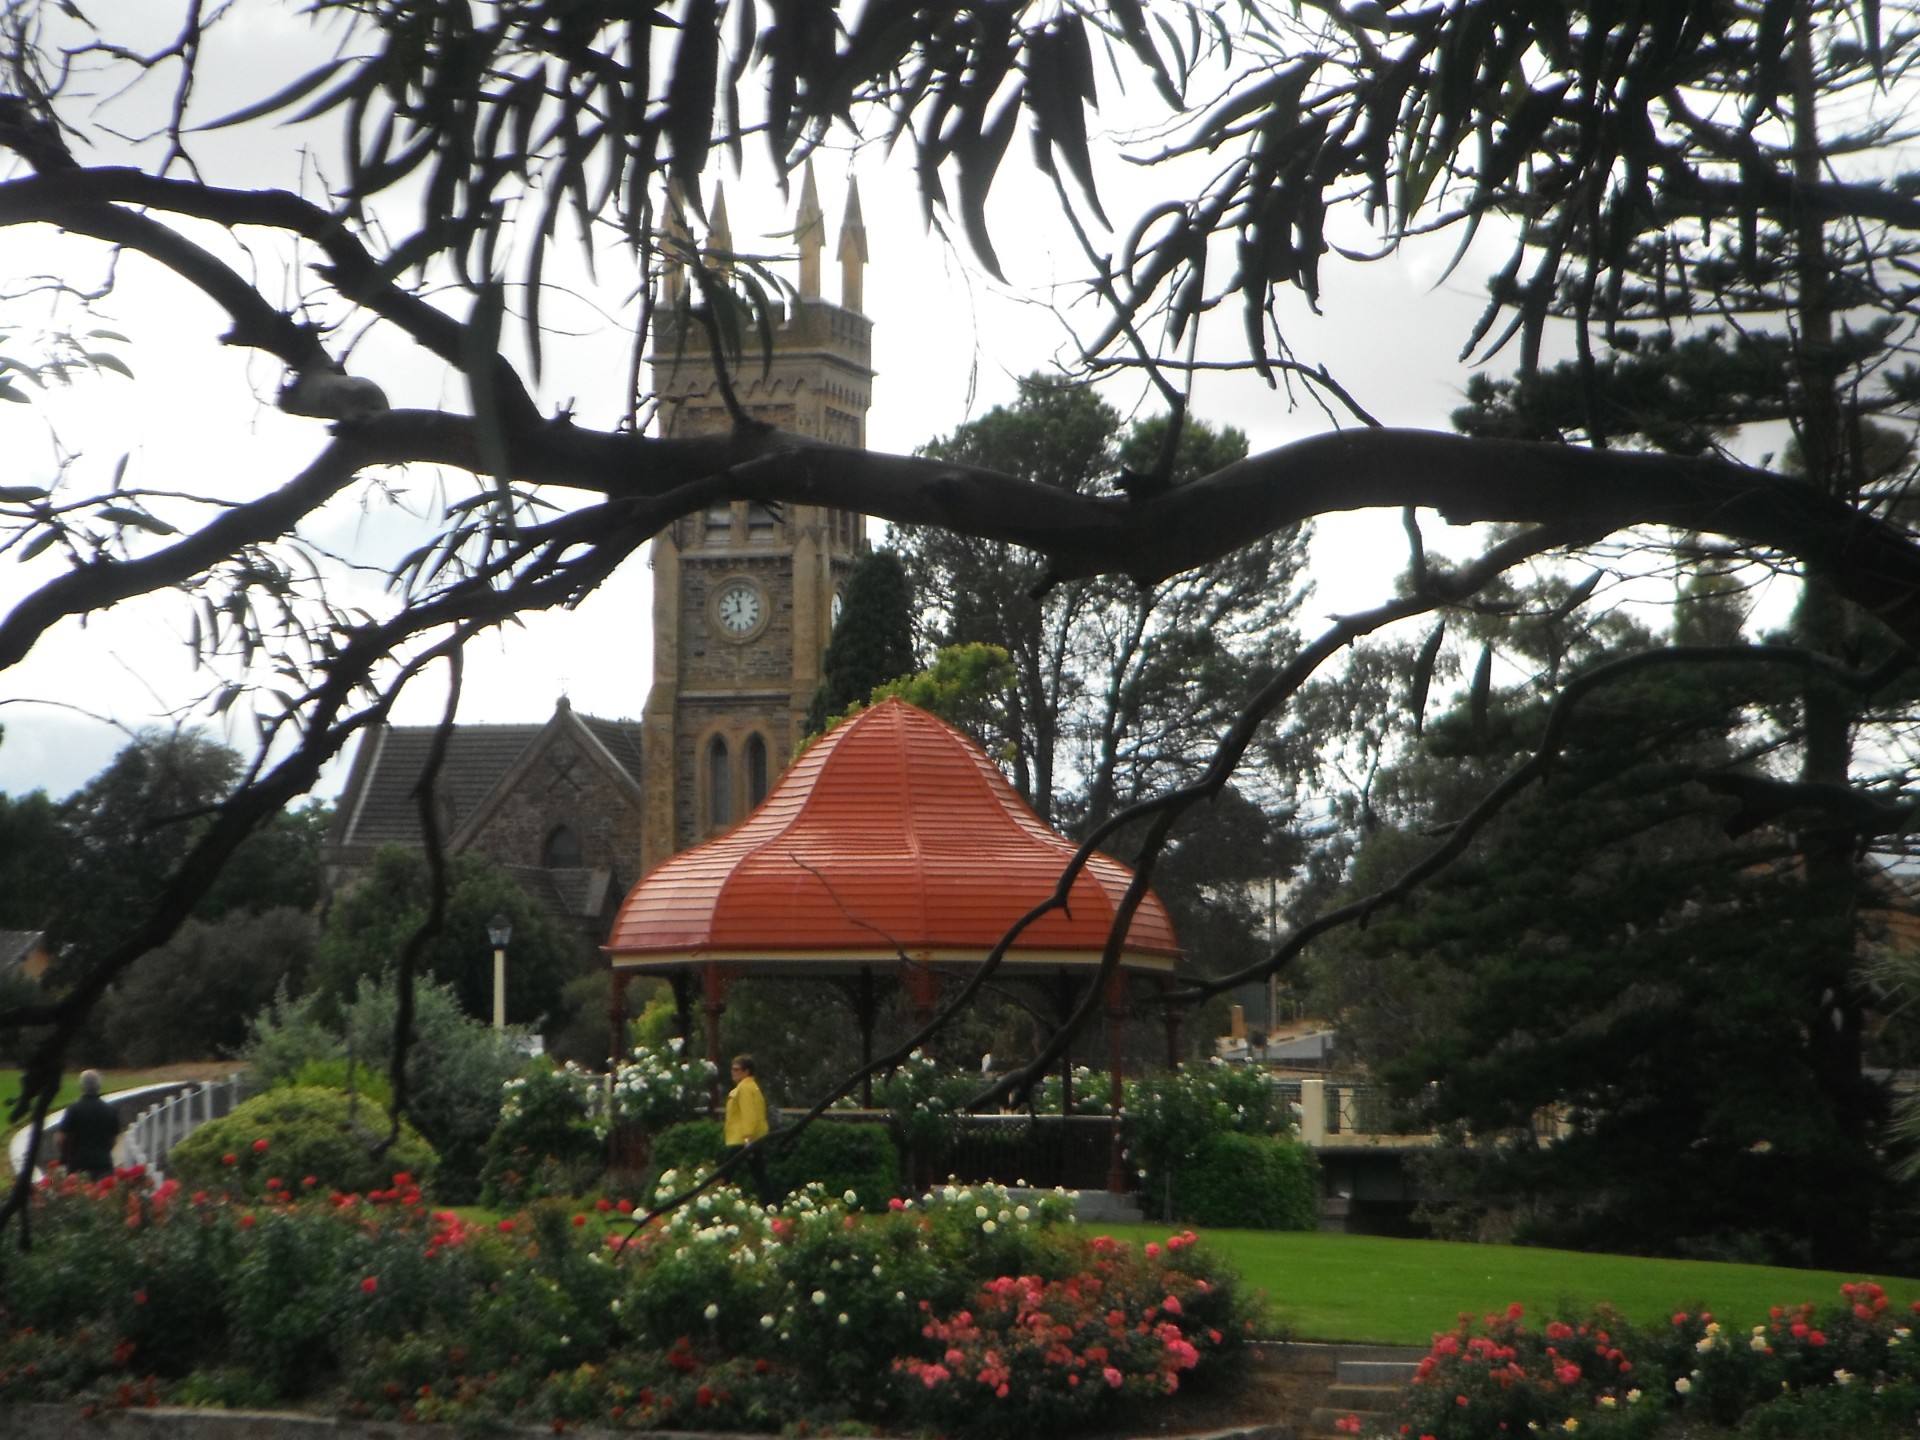 A gazebo in parkland with a church in the background gives an English feel.